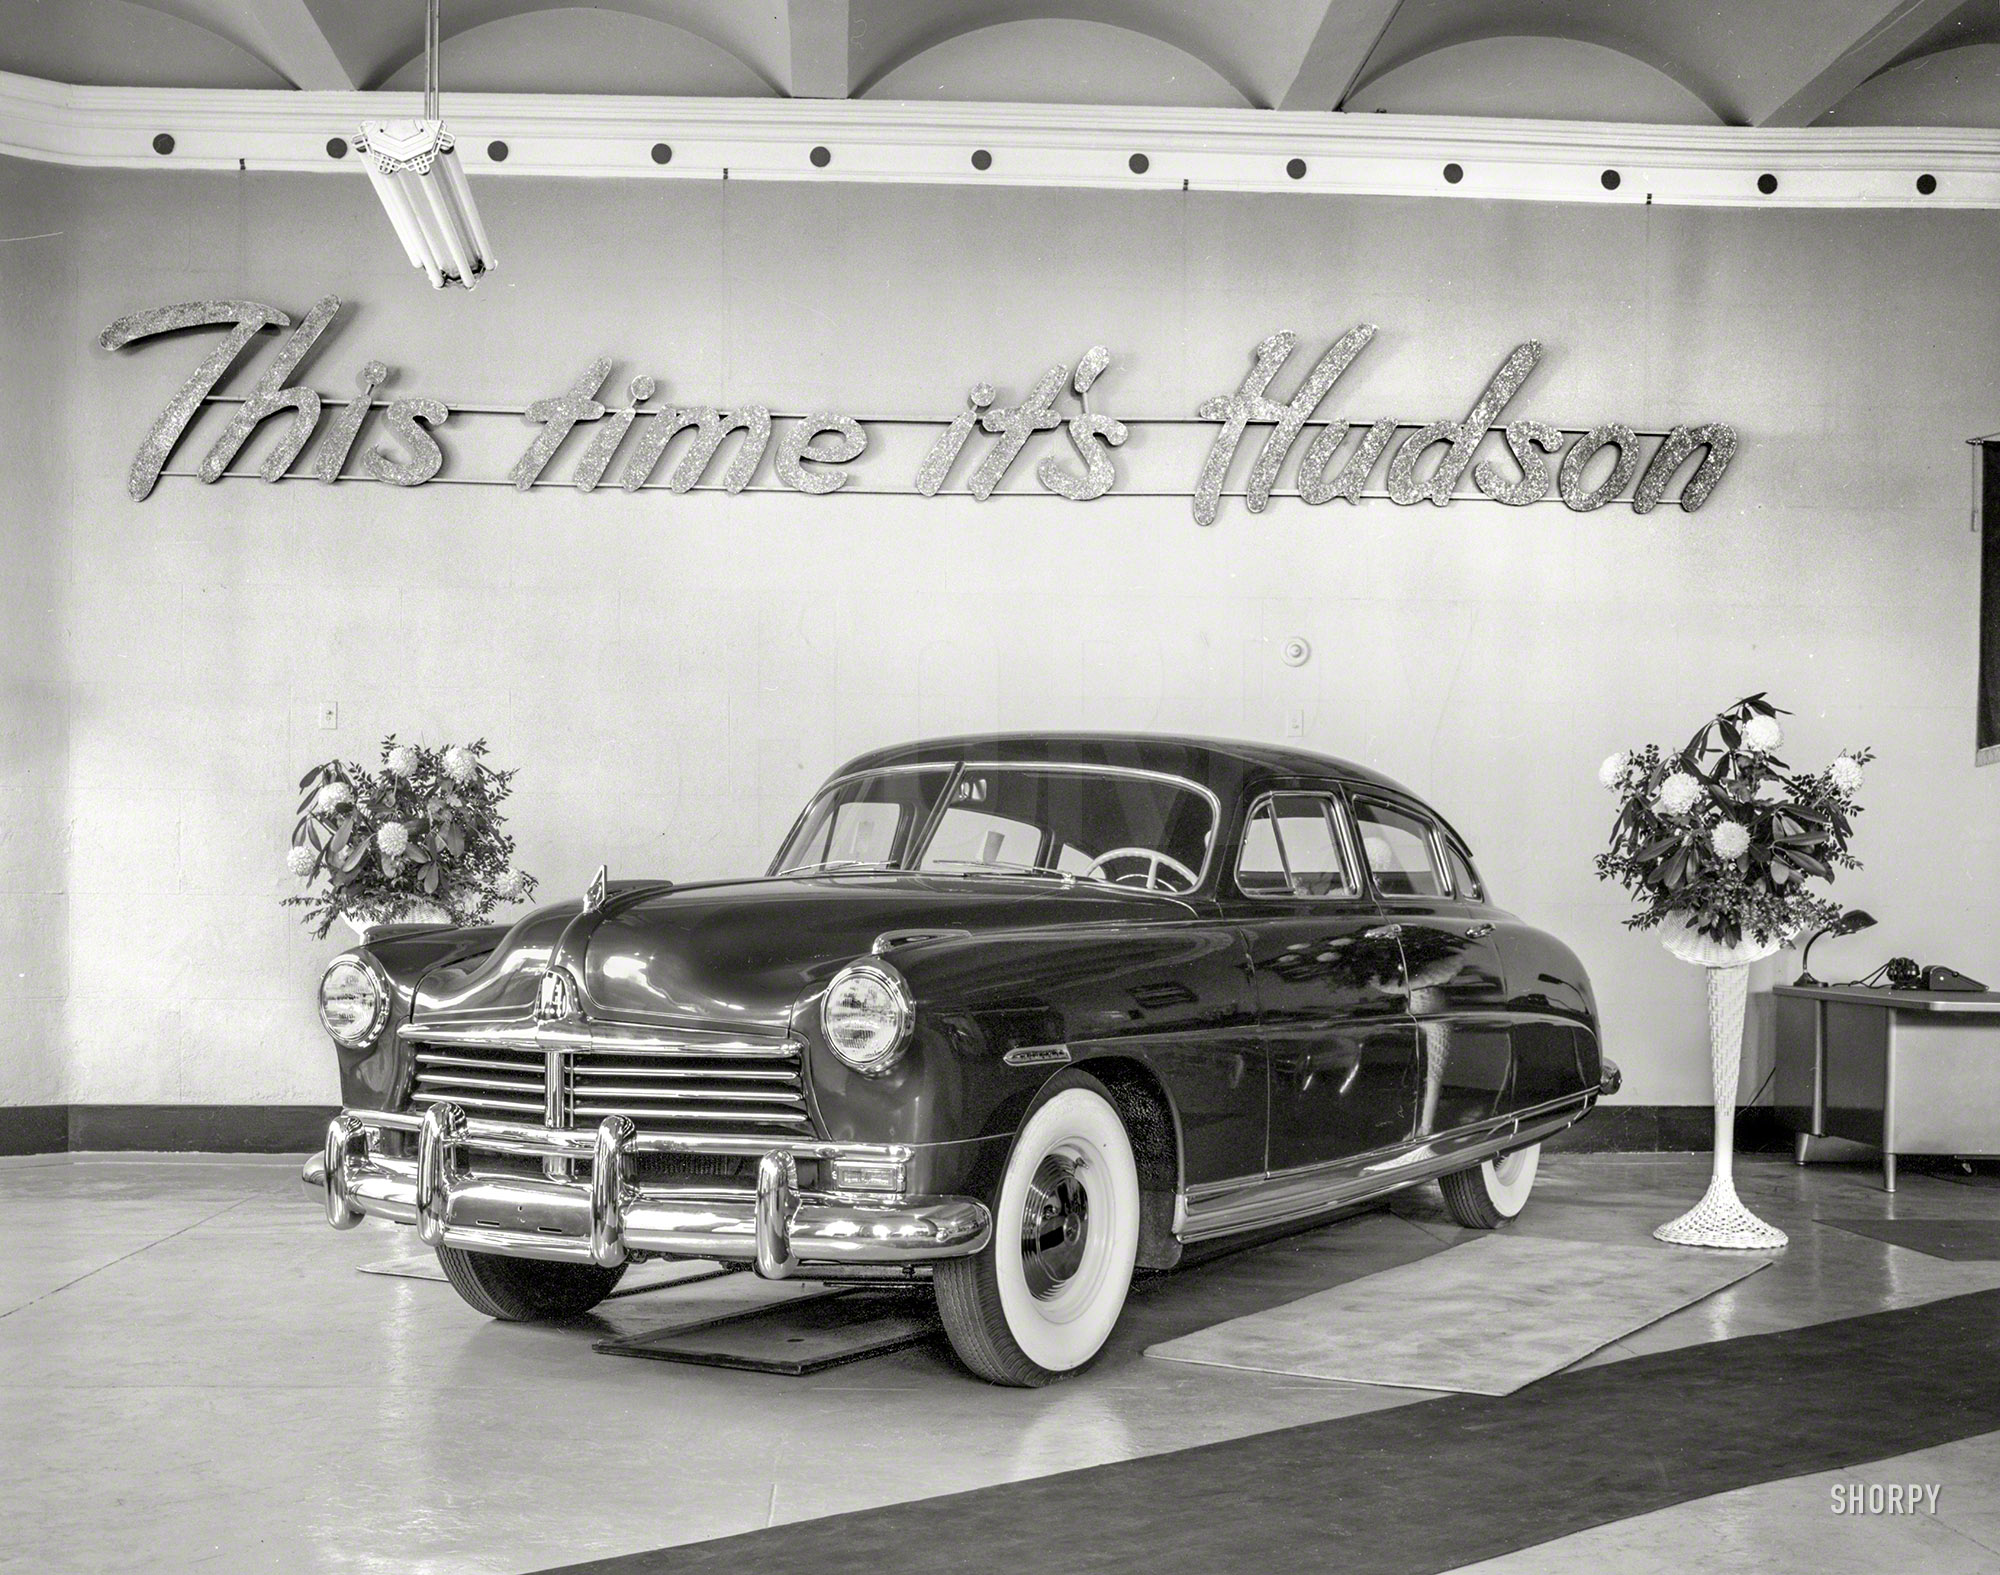 New York circa 1948. "The new Hudson." From a design standpoint, the venerable carmaker's last hurrah. 4x5 acetate negative by John M. Fox. View full size.